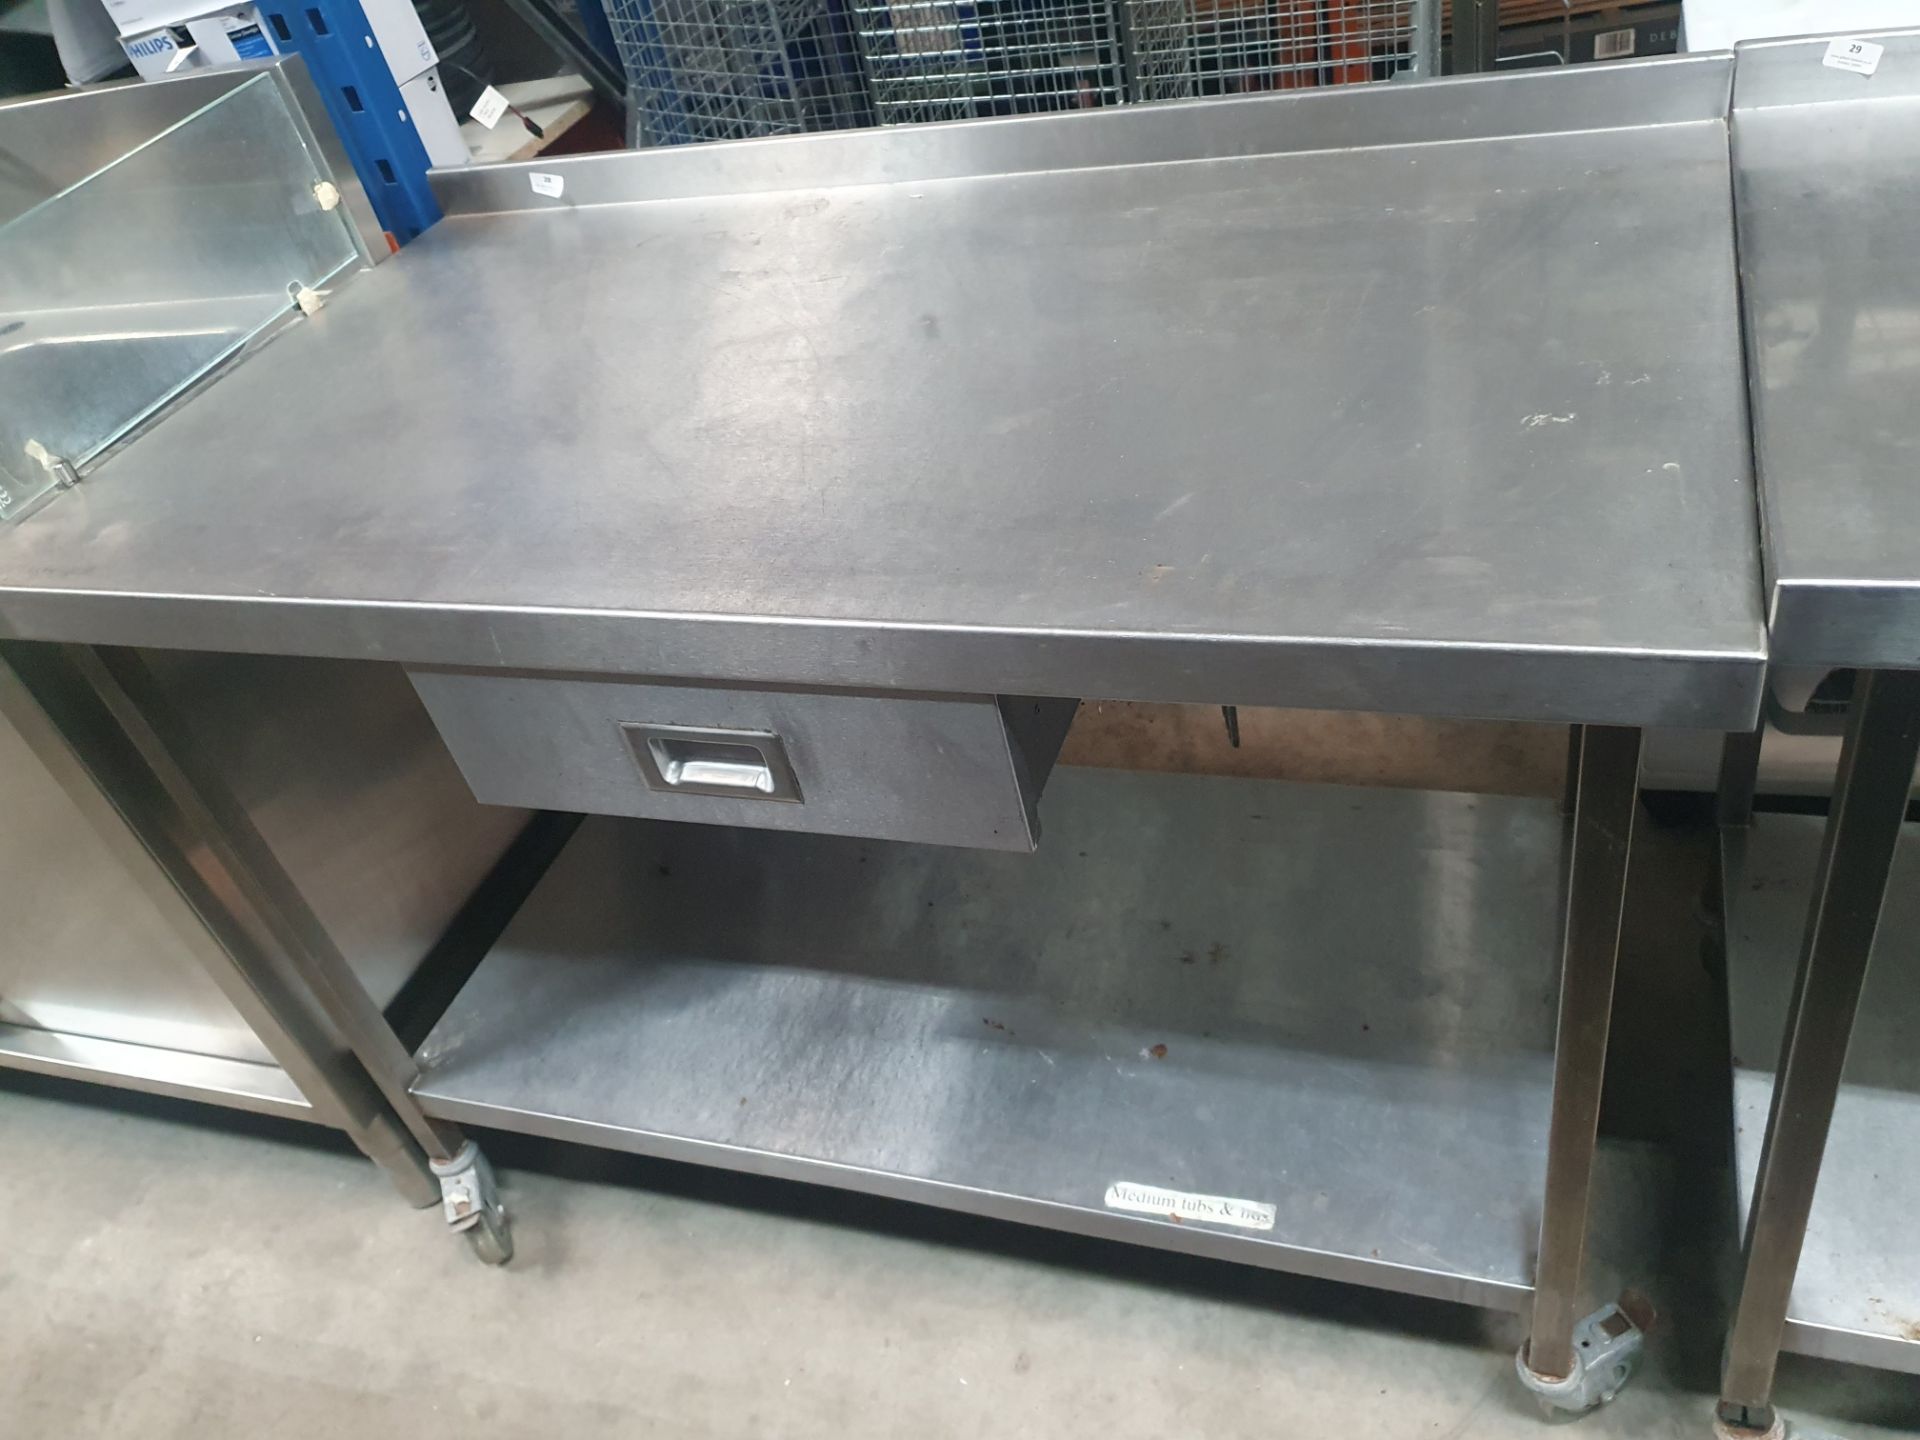 * S/S prep bench on castors with drawer and undershelf. 1250w x 700d x 940h